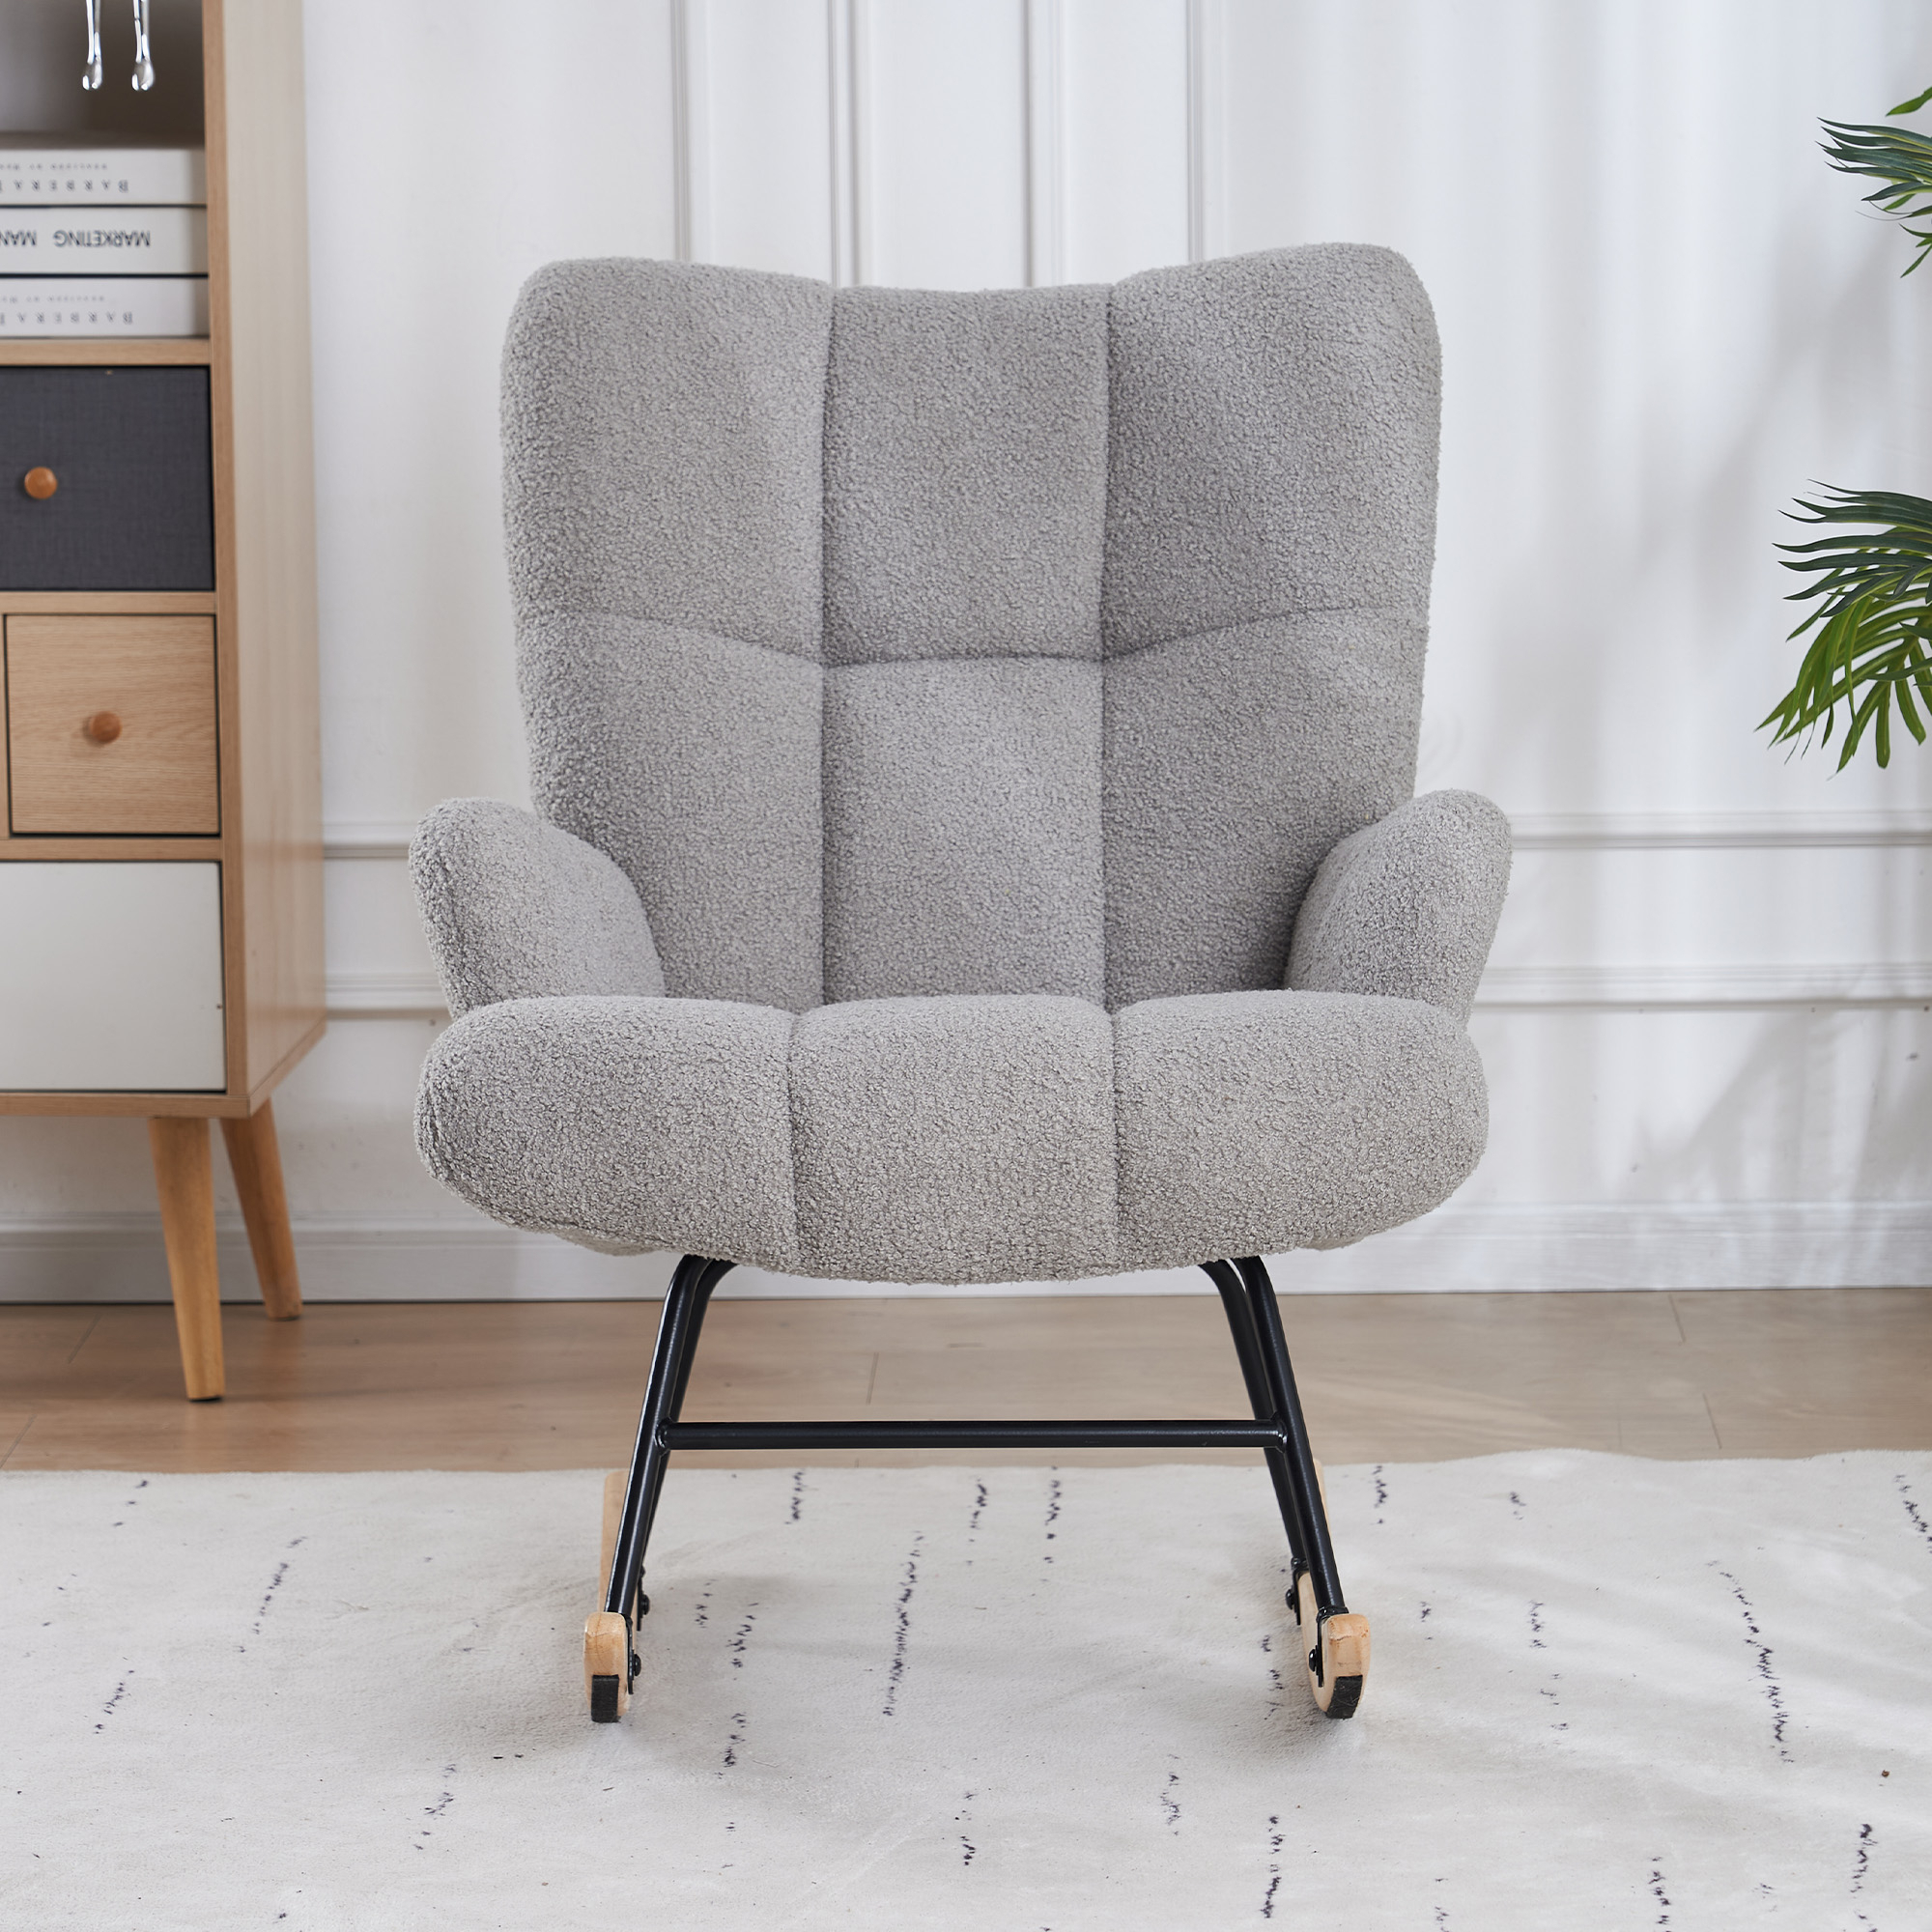 Teddy Velvet Rocking Accent Chair, Uplostered Glider Rocker Armchair For Nursery, Comfy Wingback Armchair - White